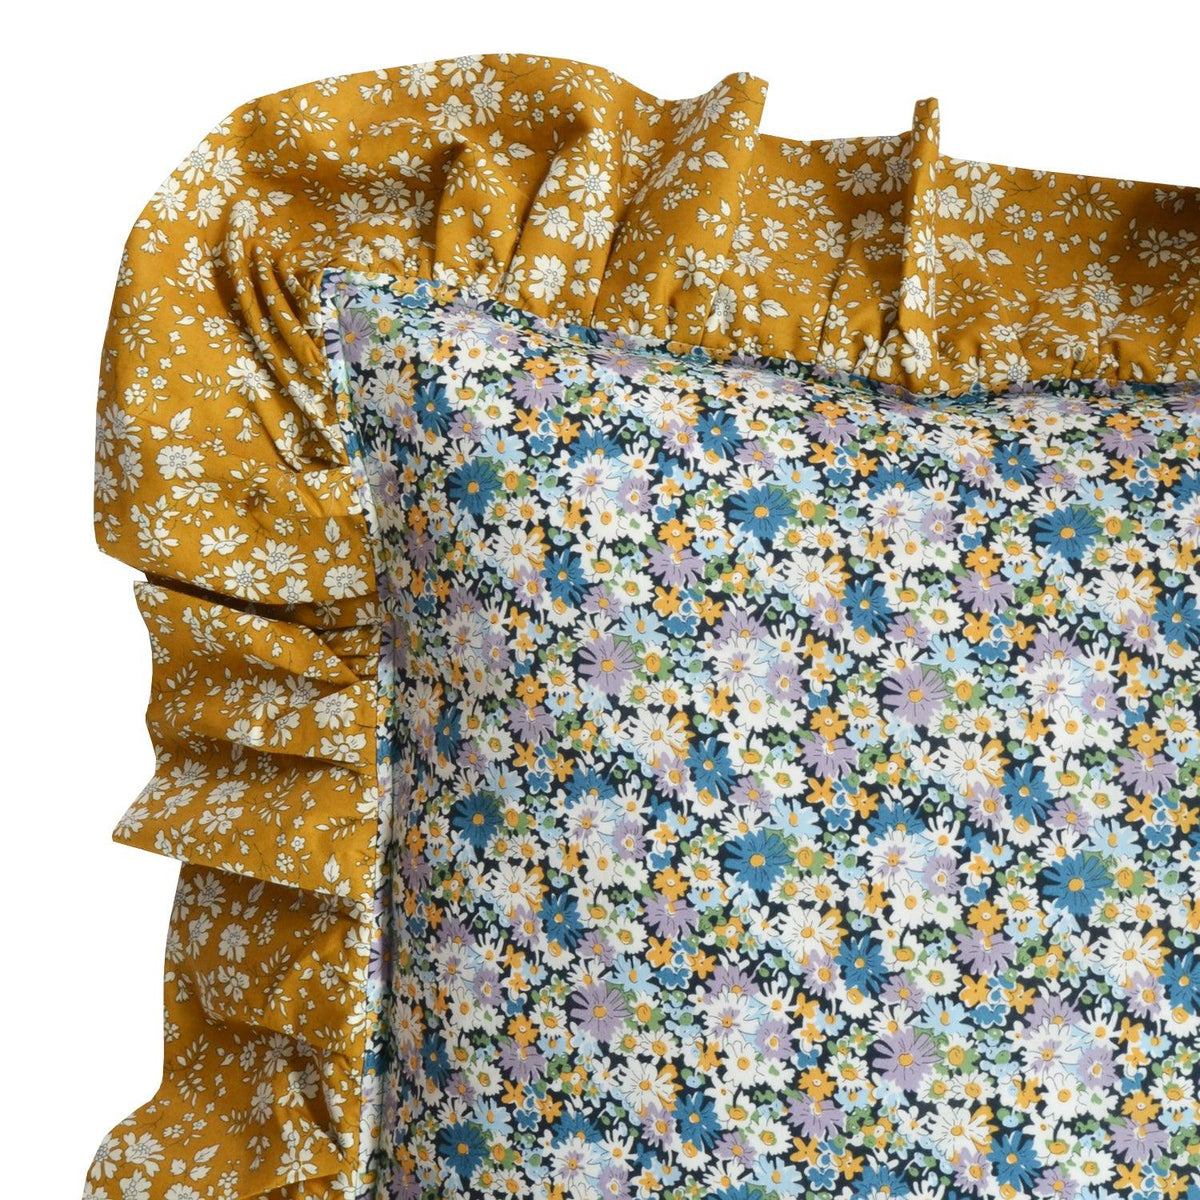 Ruffle Cushion made with Liberty Fabric LIBBY & CAPEL - Coco & Wolf